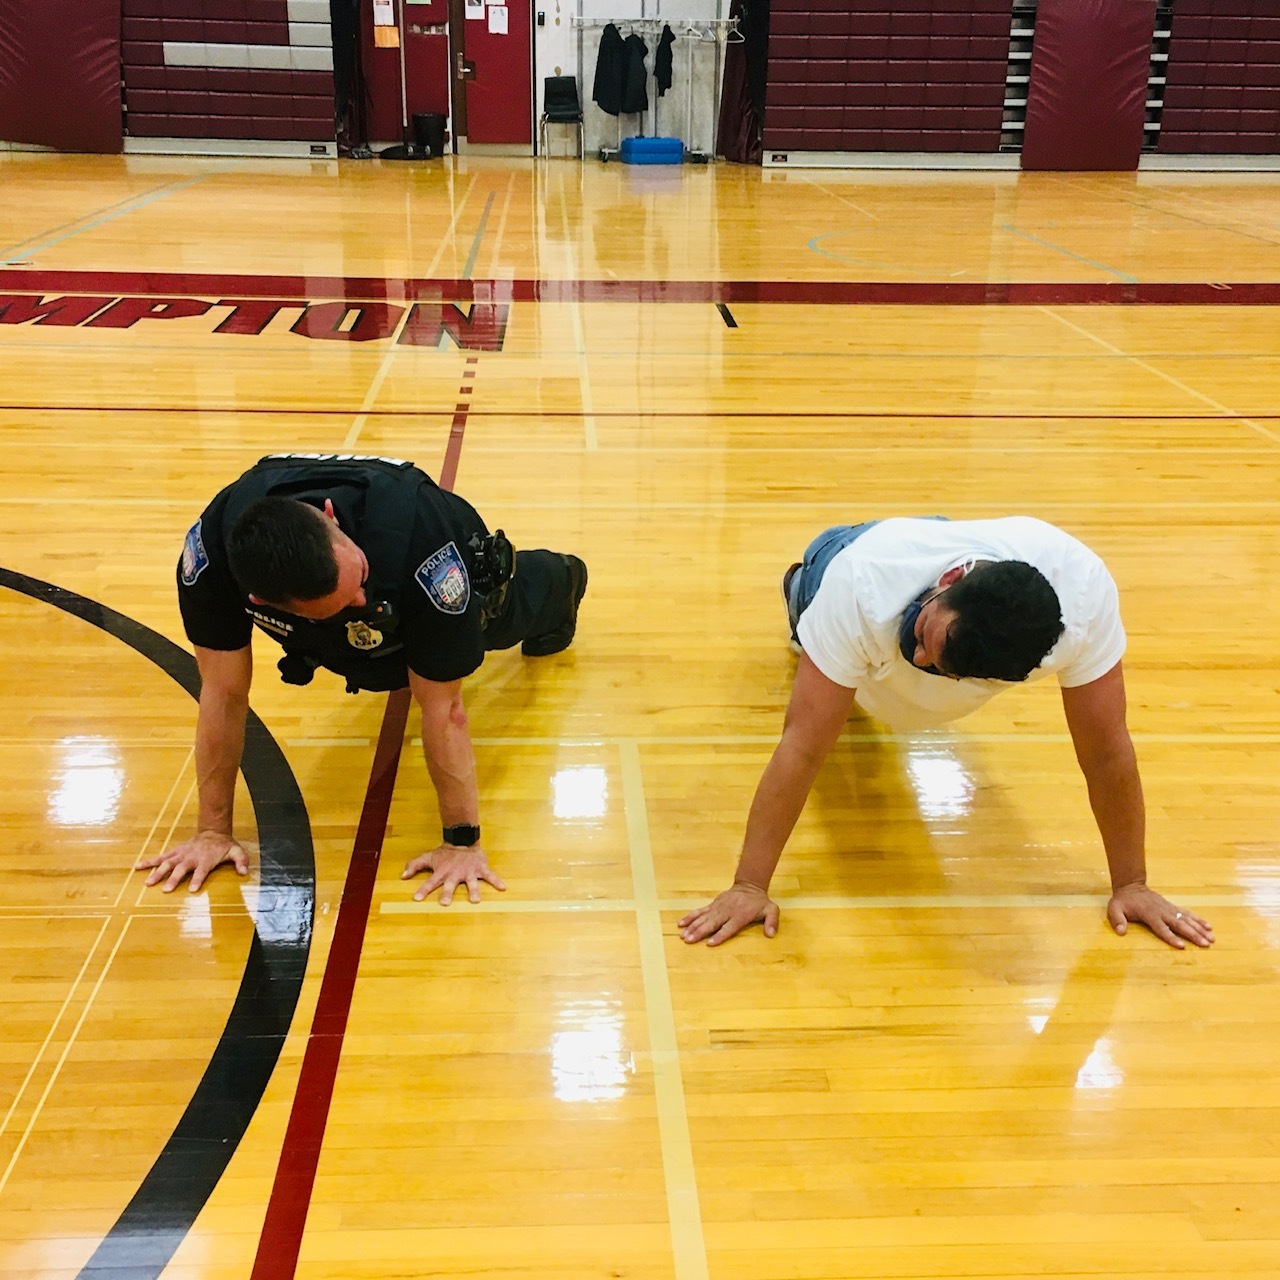 A face-off during the Plank for Positivity Challenge at the Southampton High School.